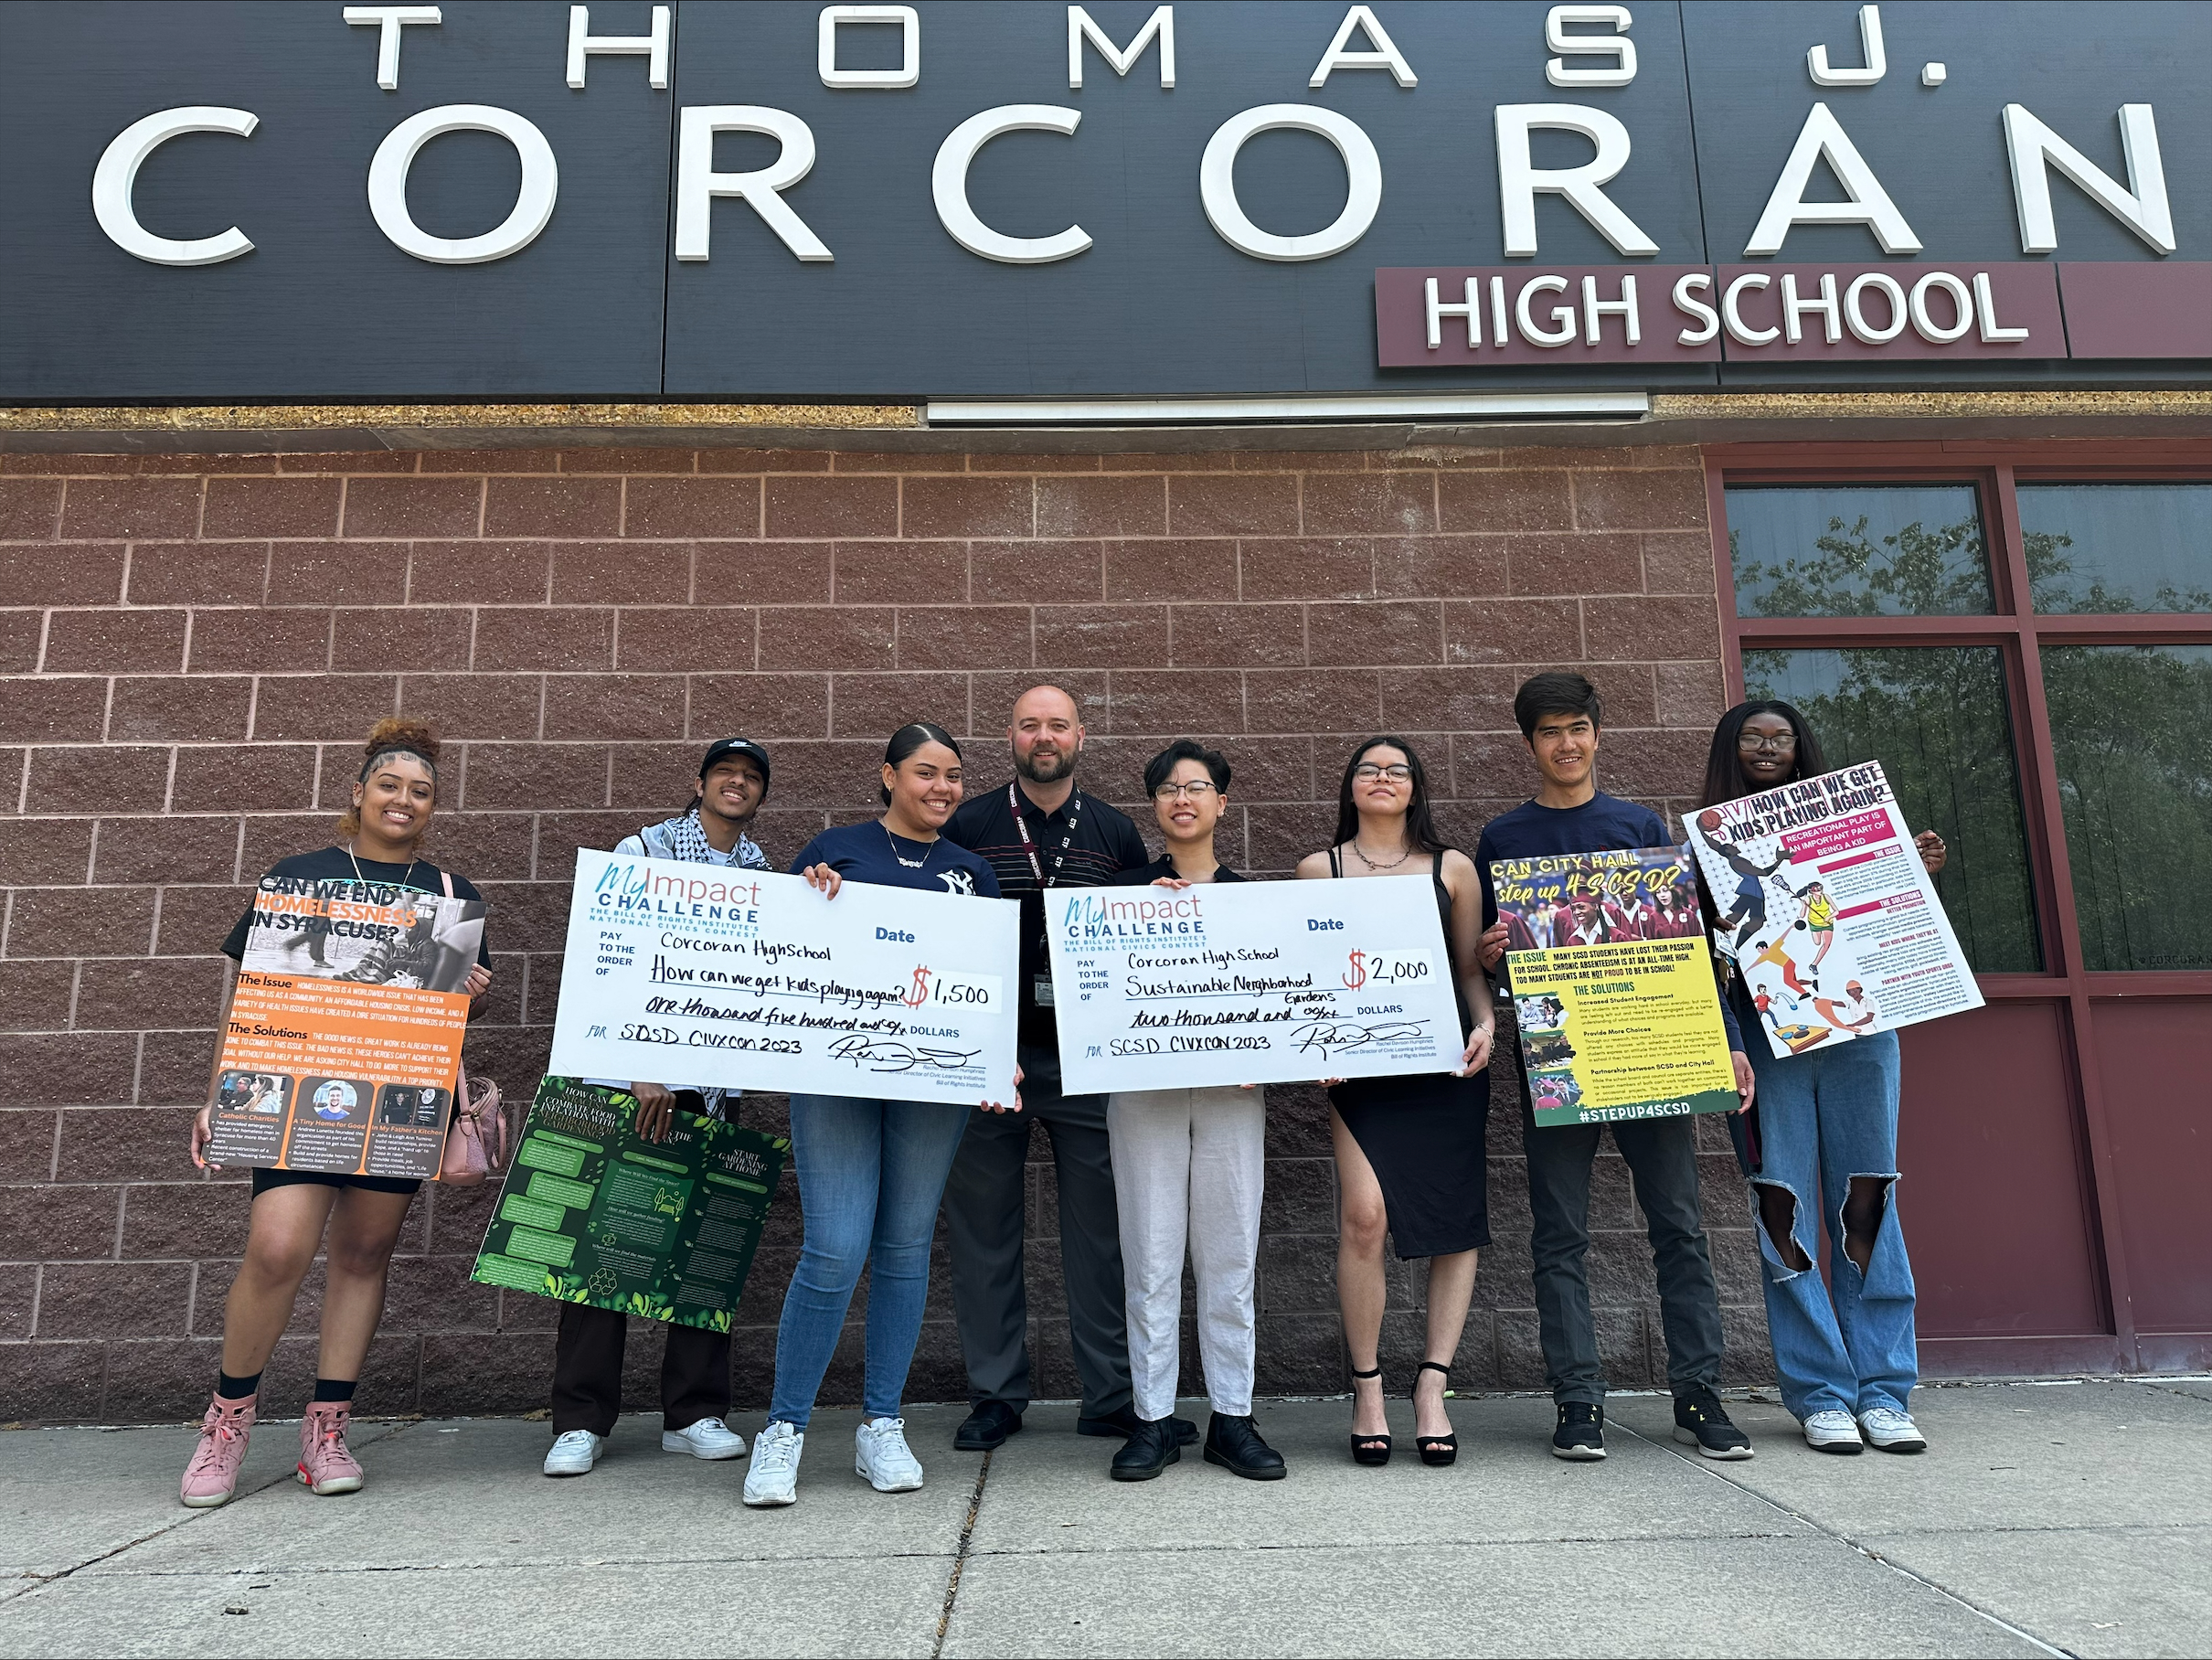 This is a photo of a group of Corcoran high school students standing outside their school building holding posters and checks they received through the Syracuse Youth Advisory Council.